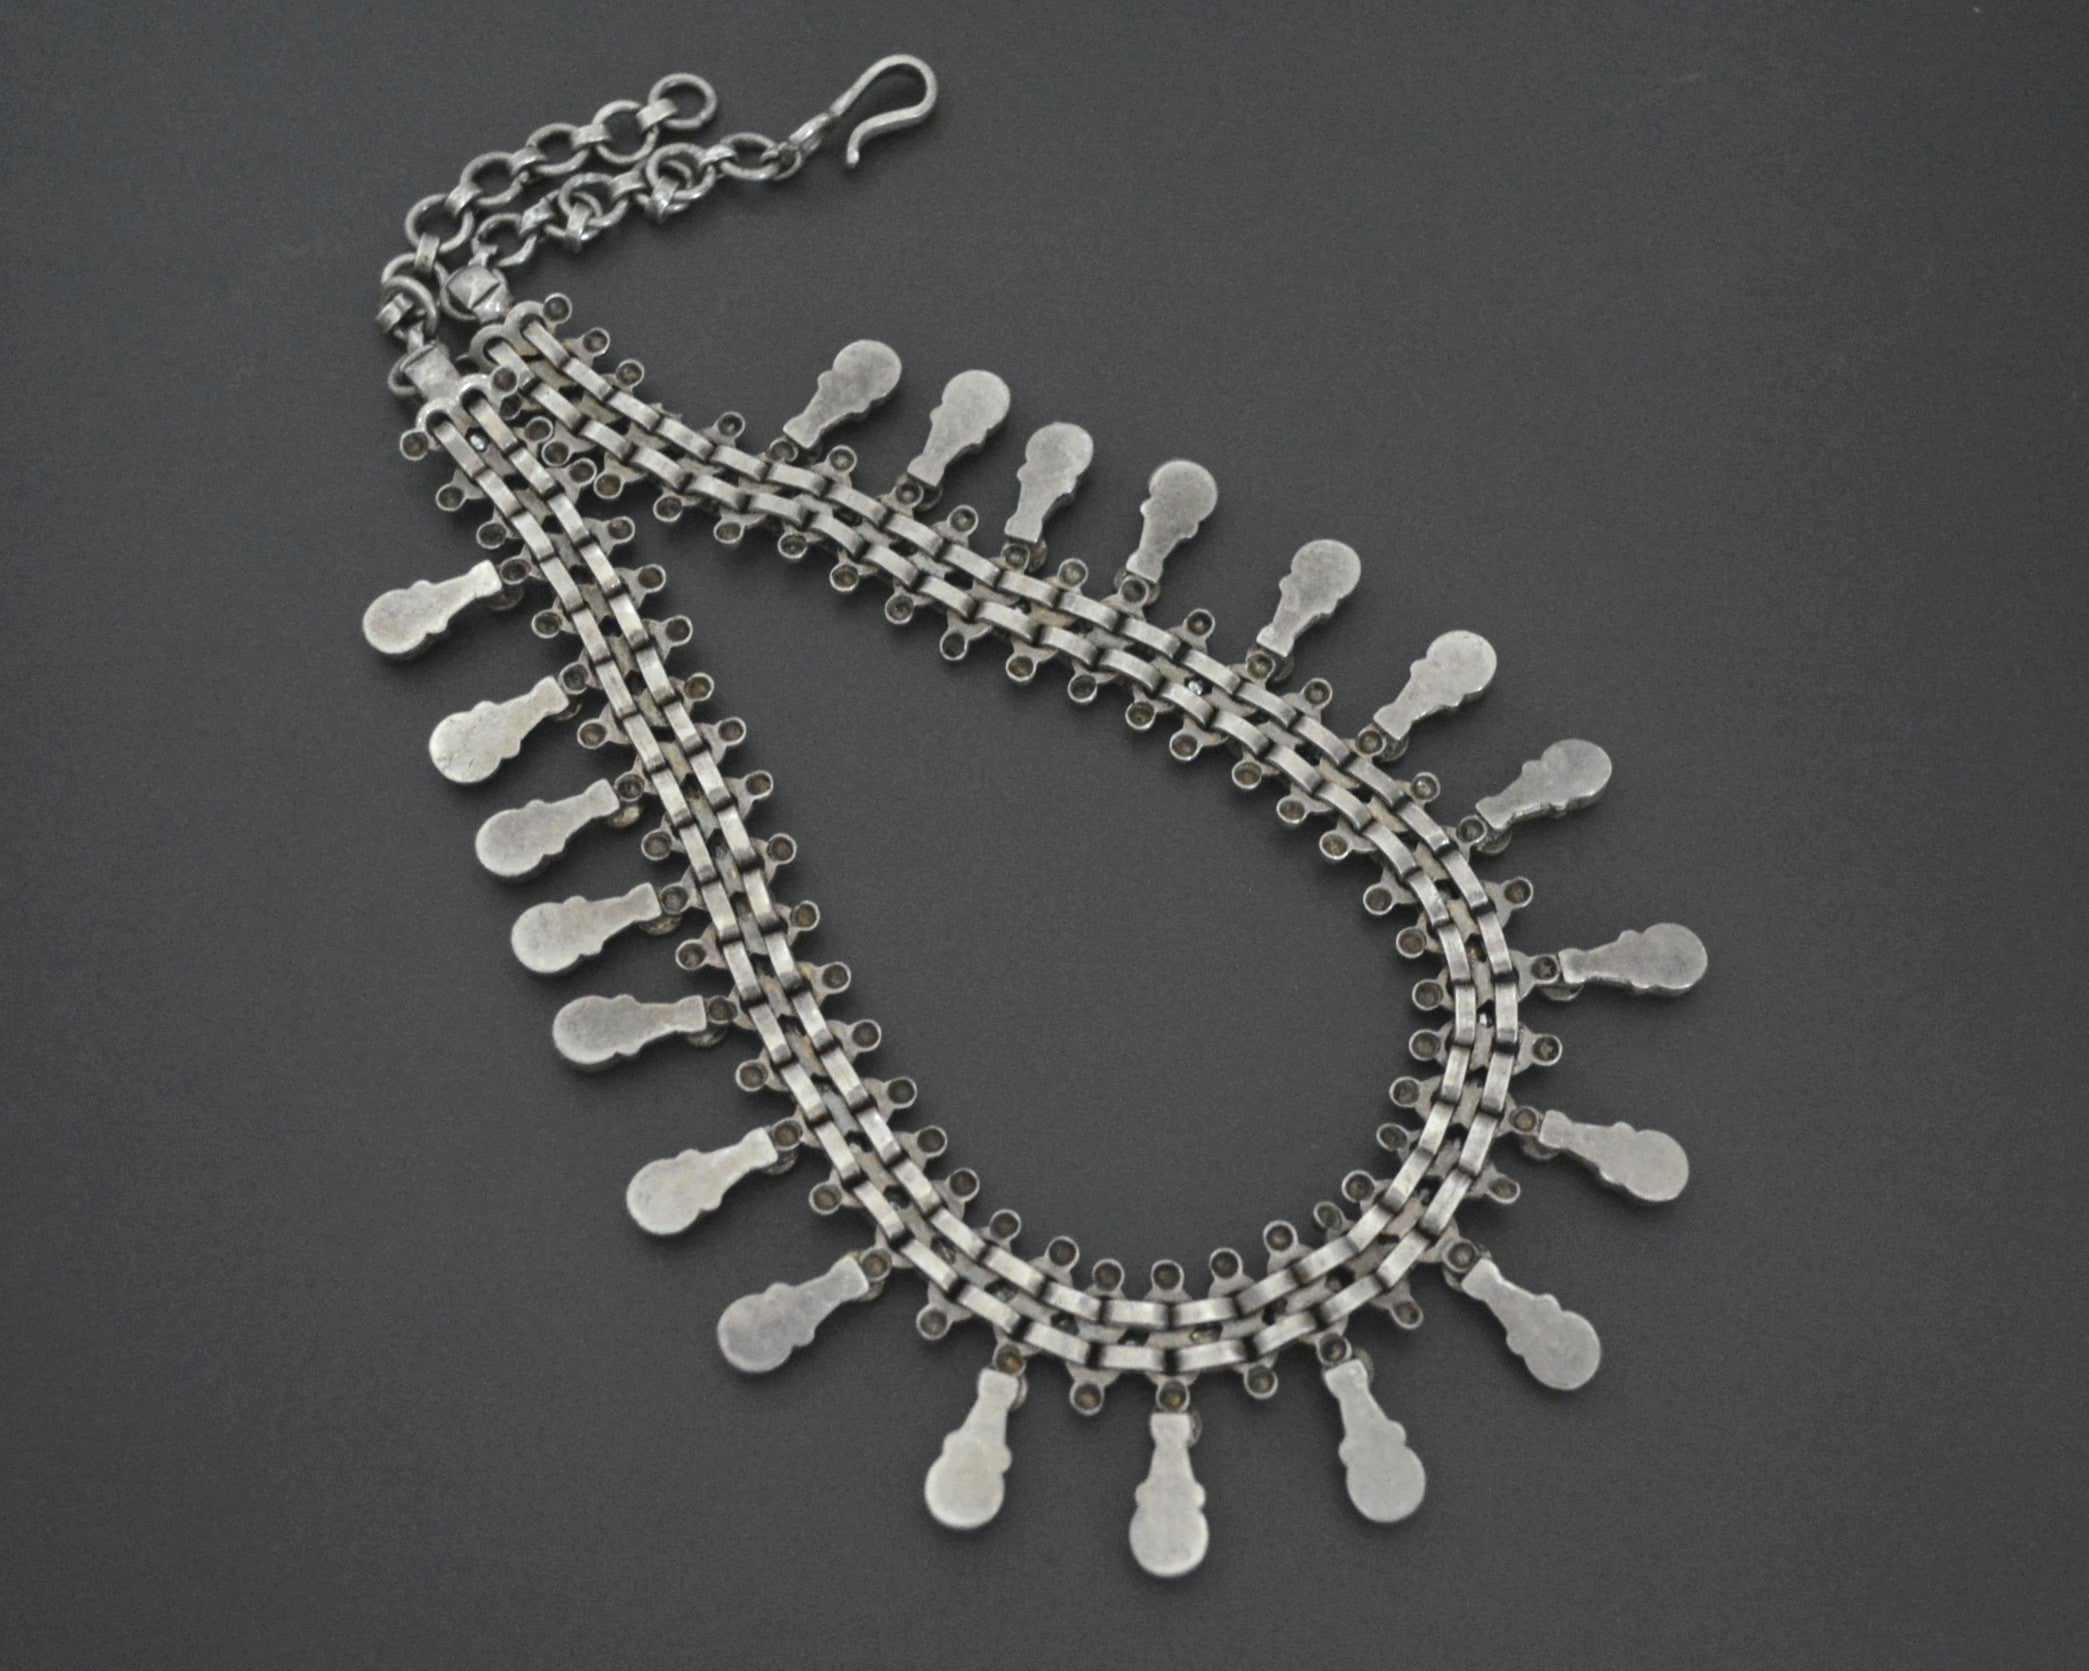 Short Indian Silver Choker Necklace